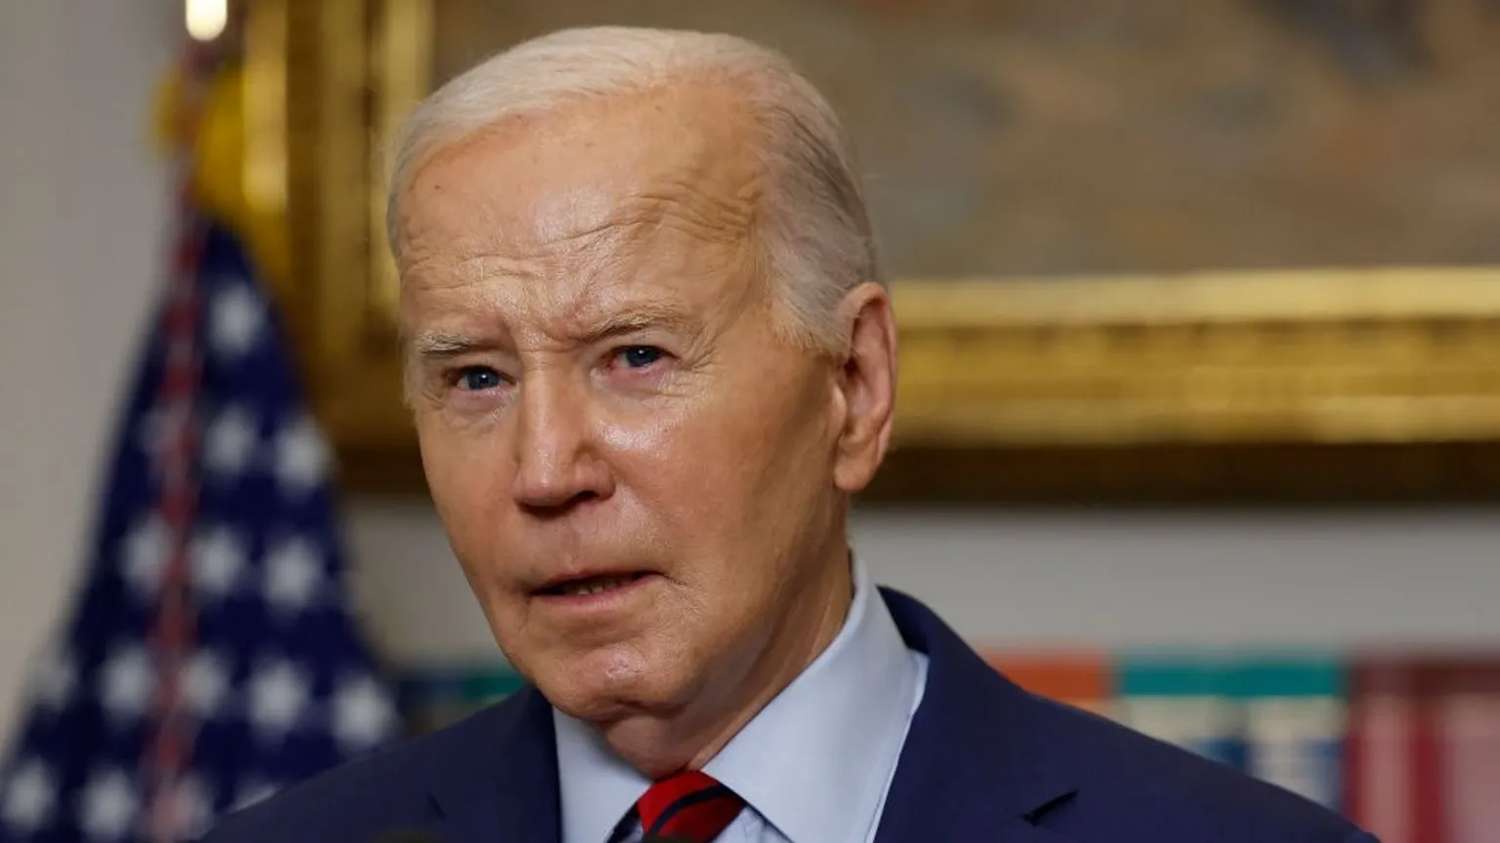 The White House has said that Joe Biden meant no offence to Japan or India with his comment.